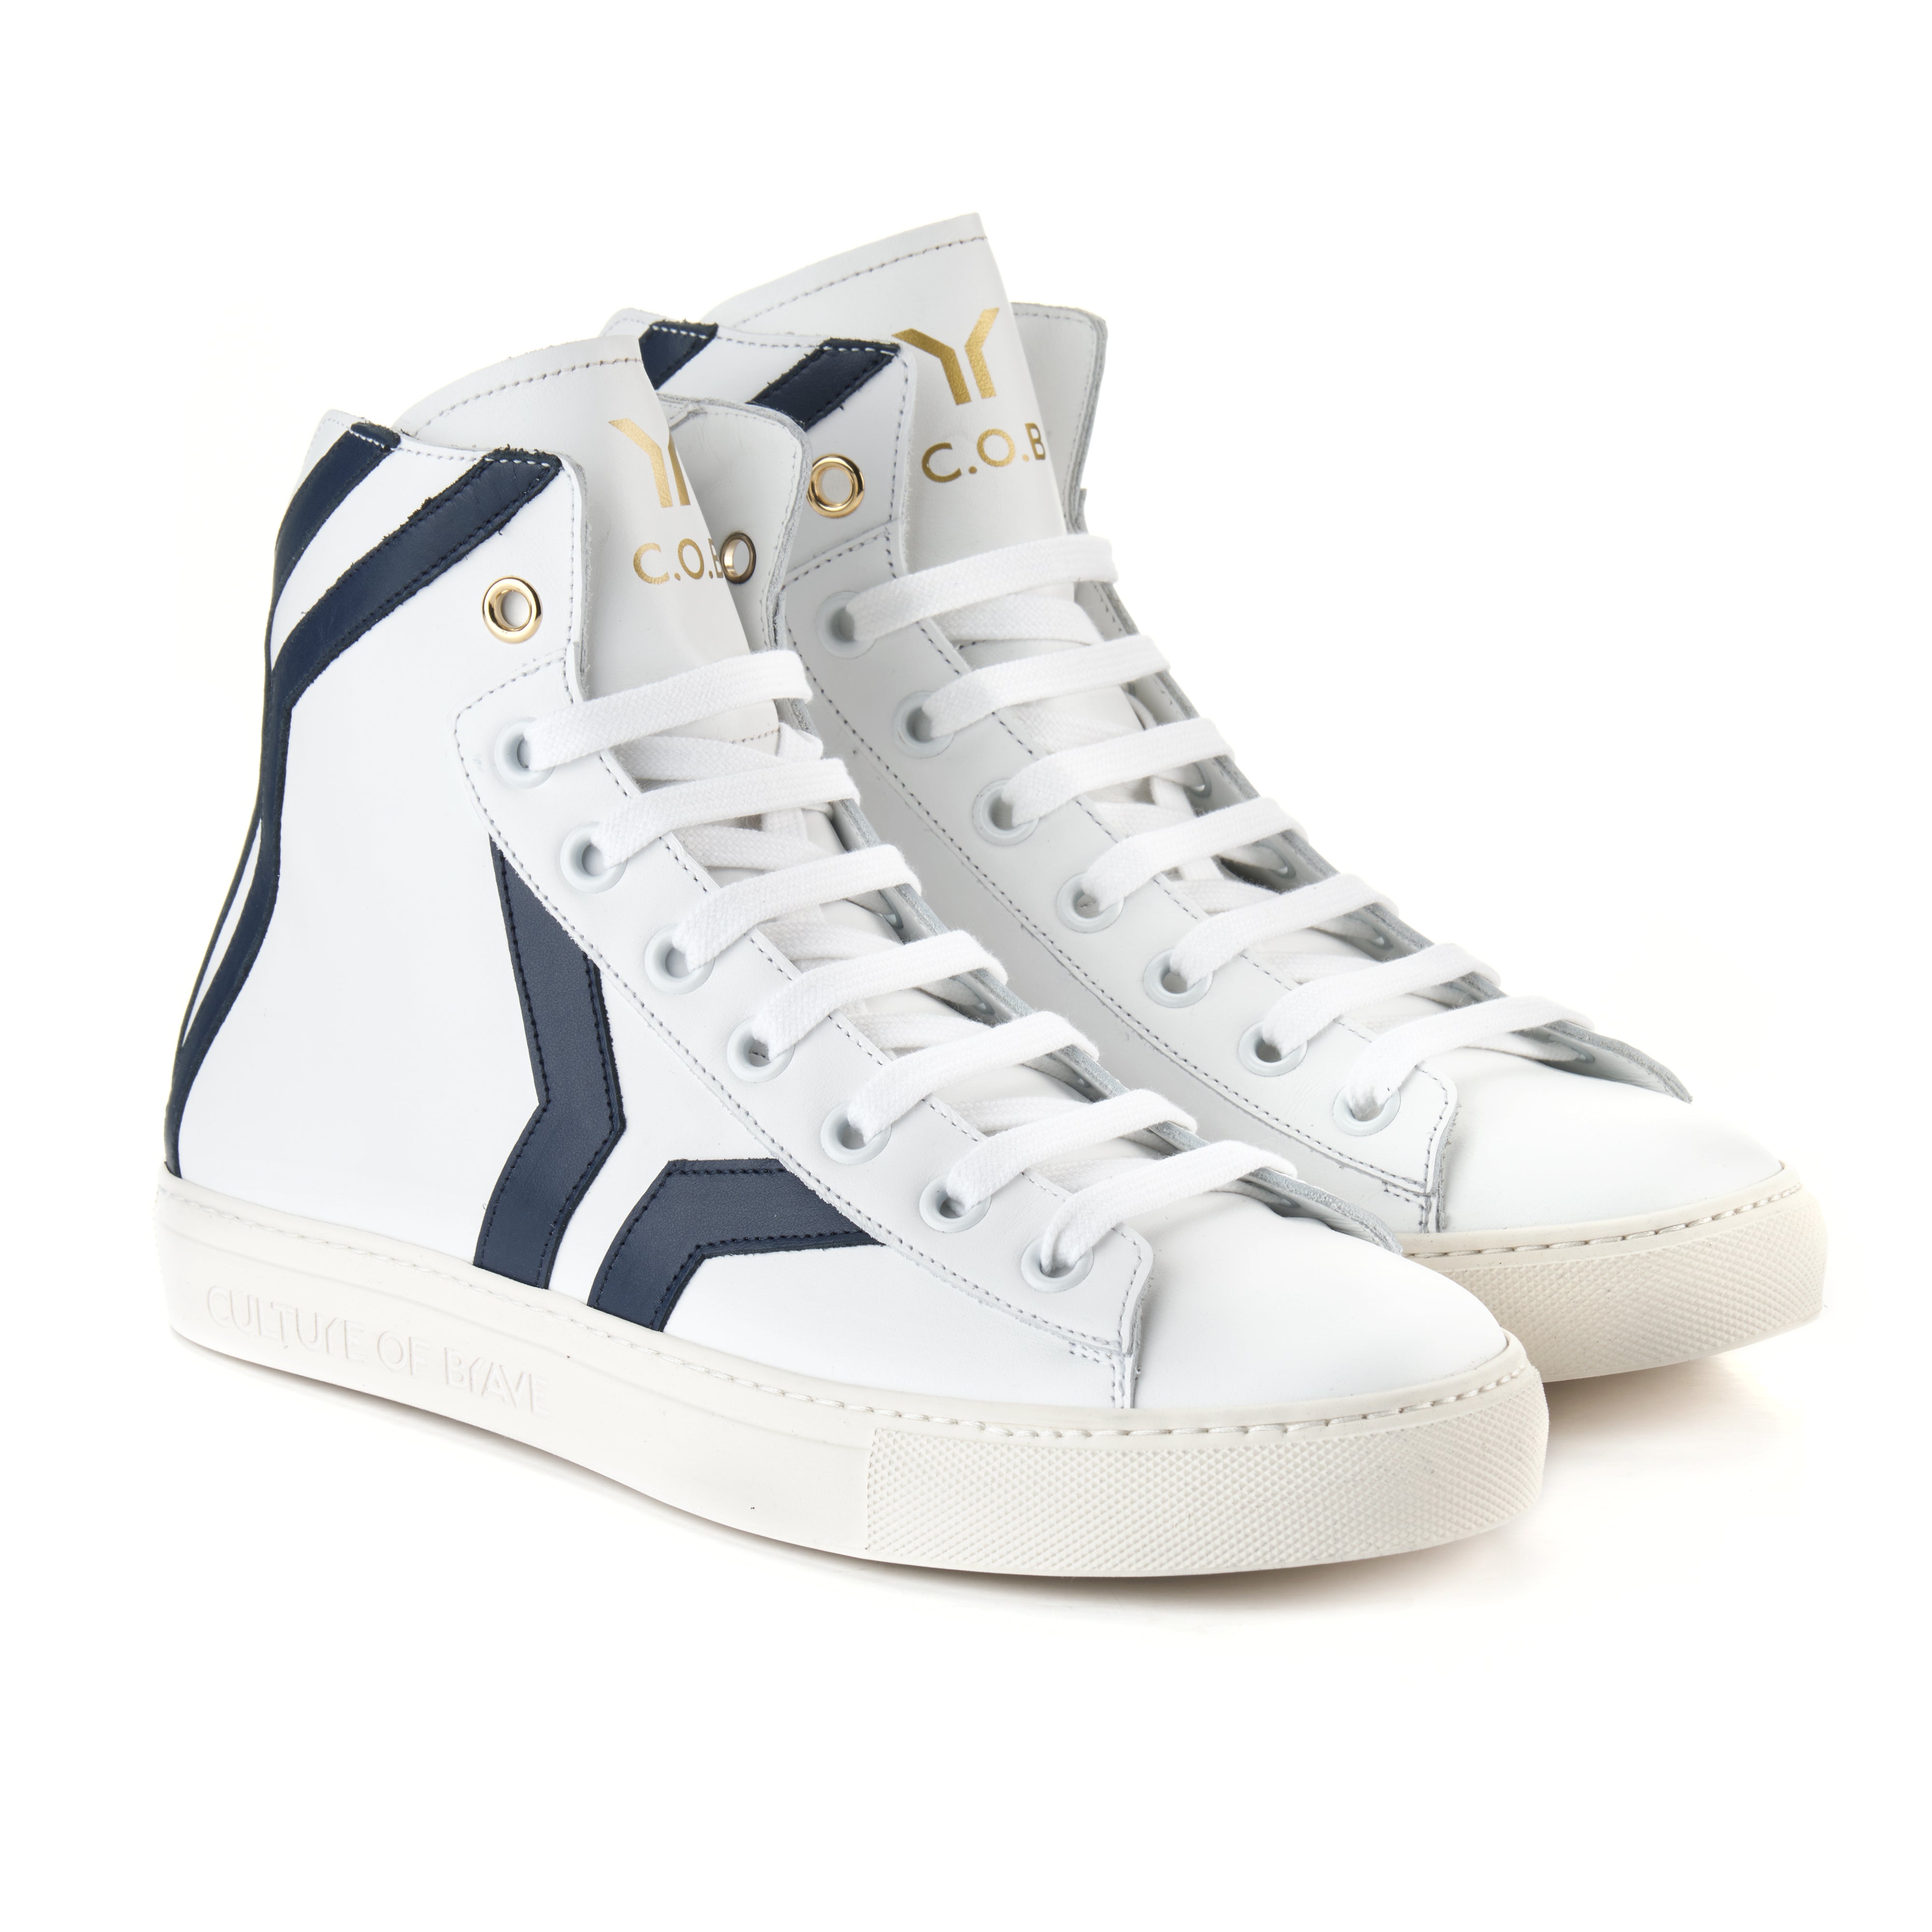 Resilient S24 Women White leather navy wing mid cut